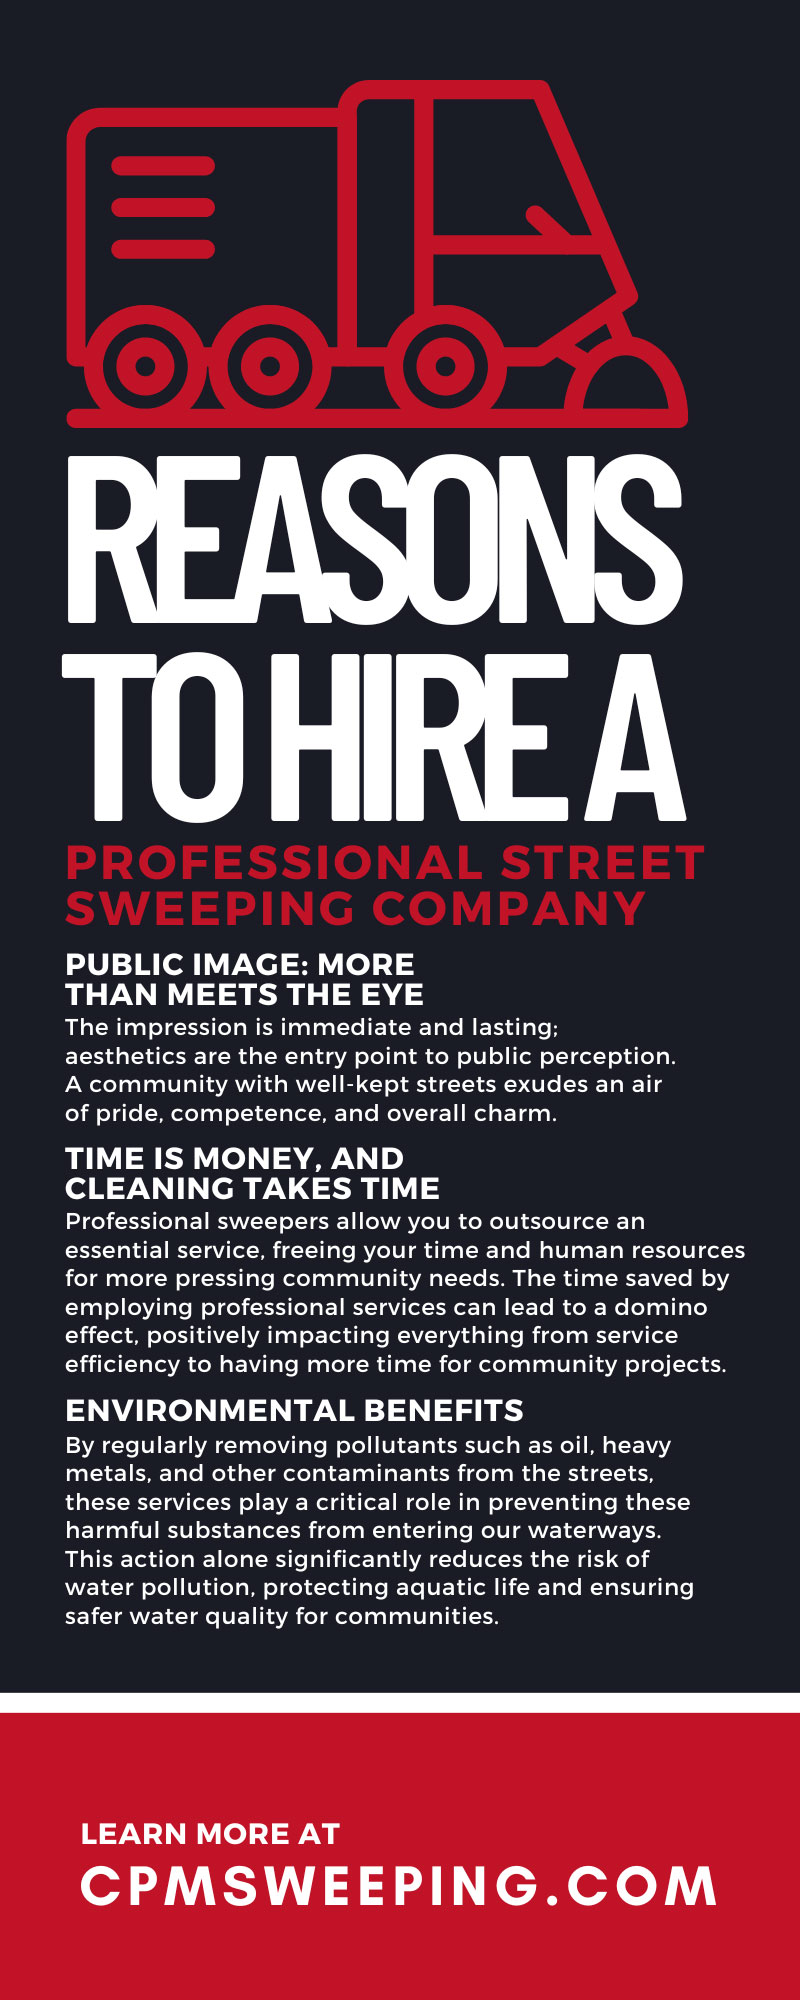 5 Reasons To Hire a Professional Street Sweeping Company